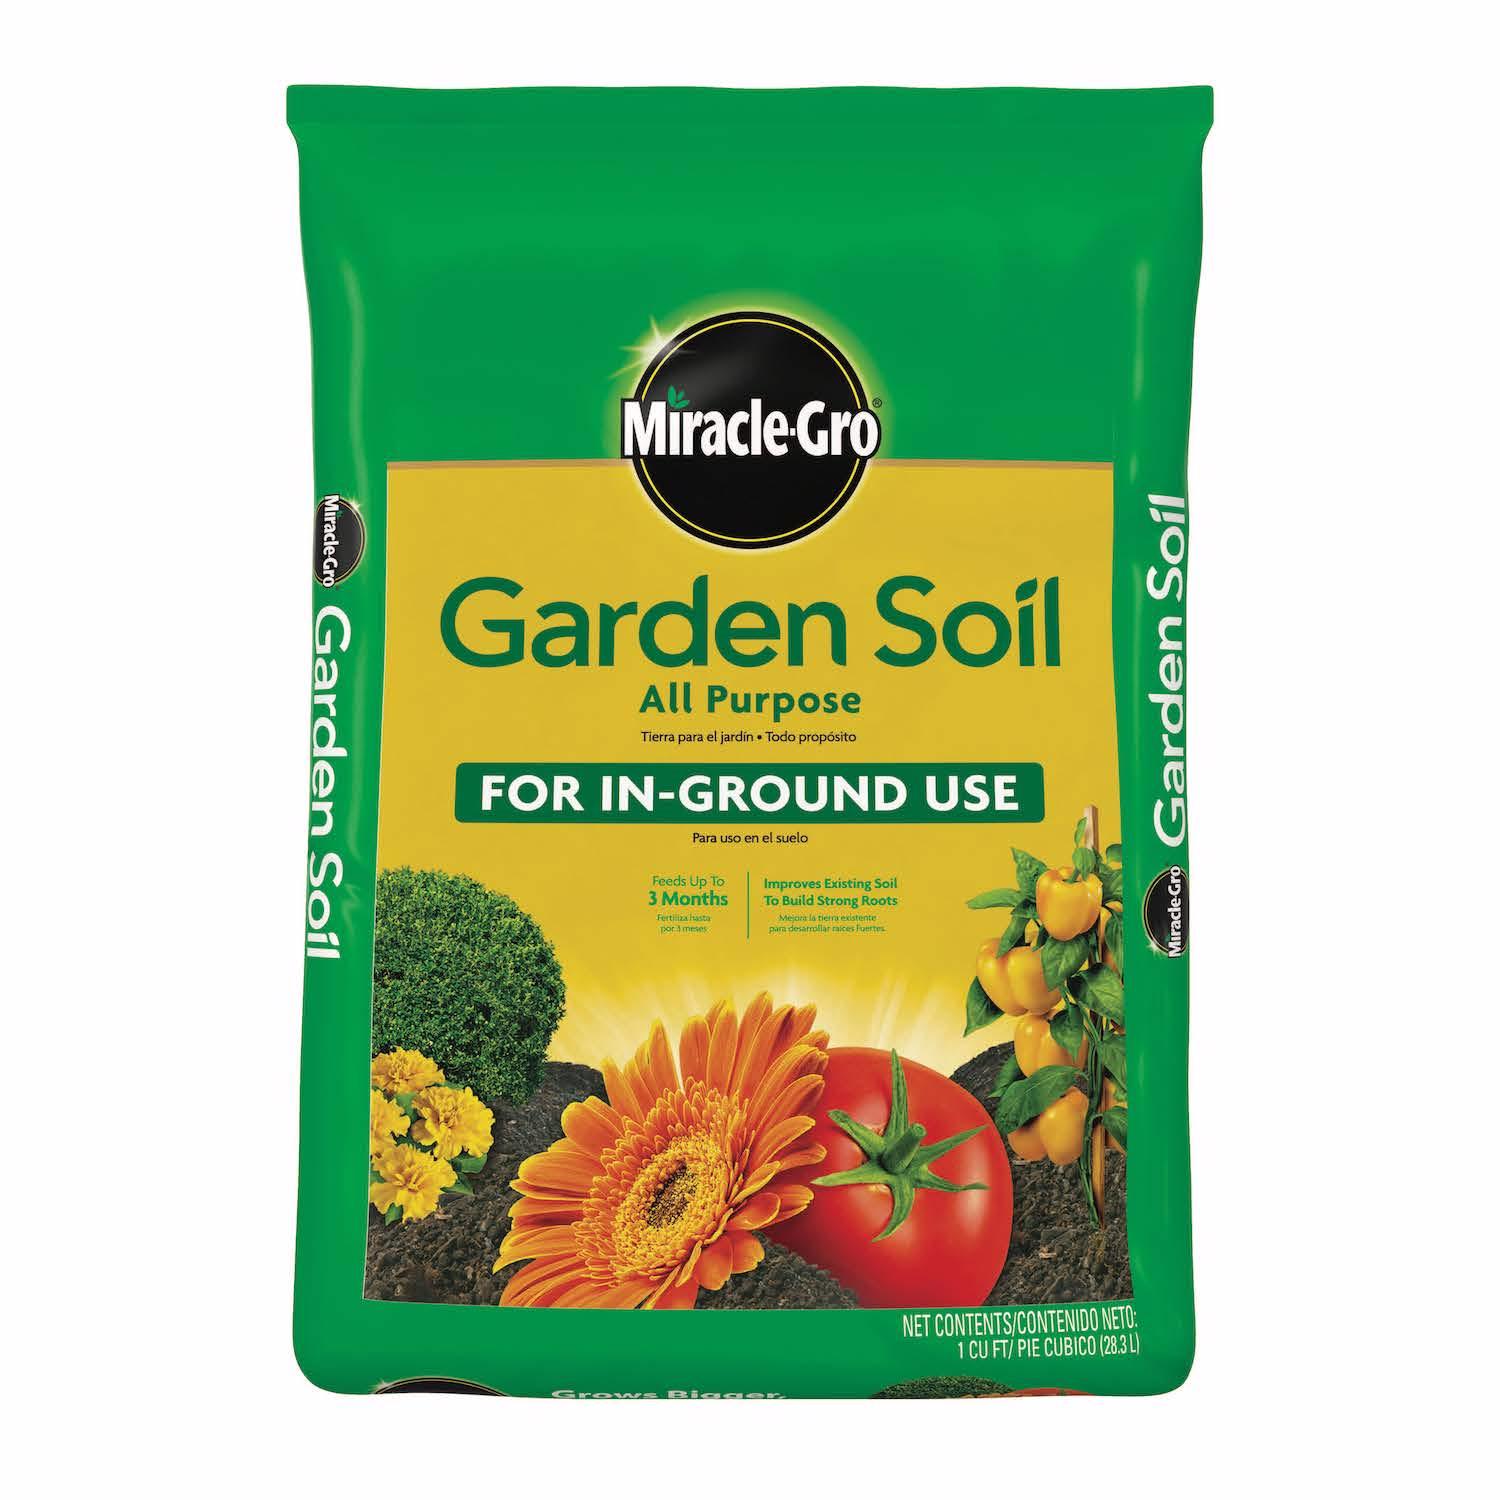 Image of garden bed filled with Miracle-Gro Garden Soil All Purpose